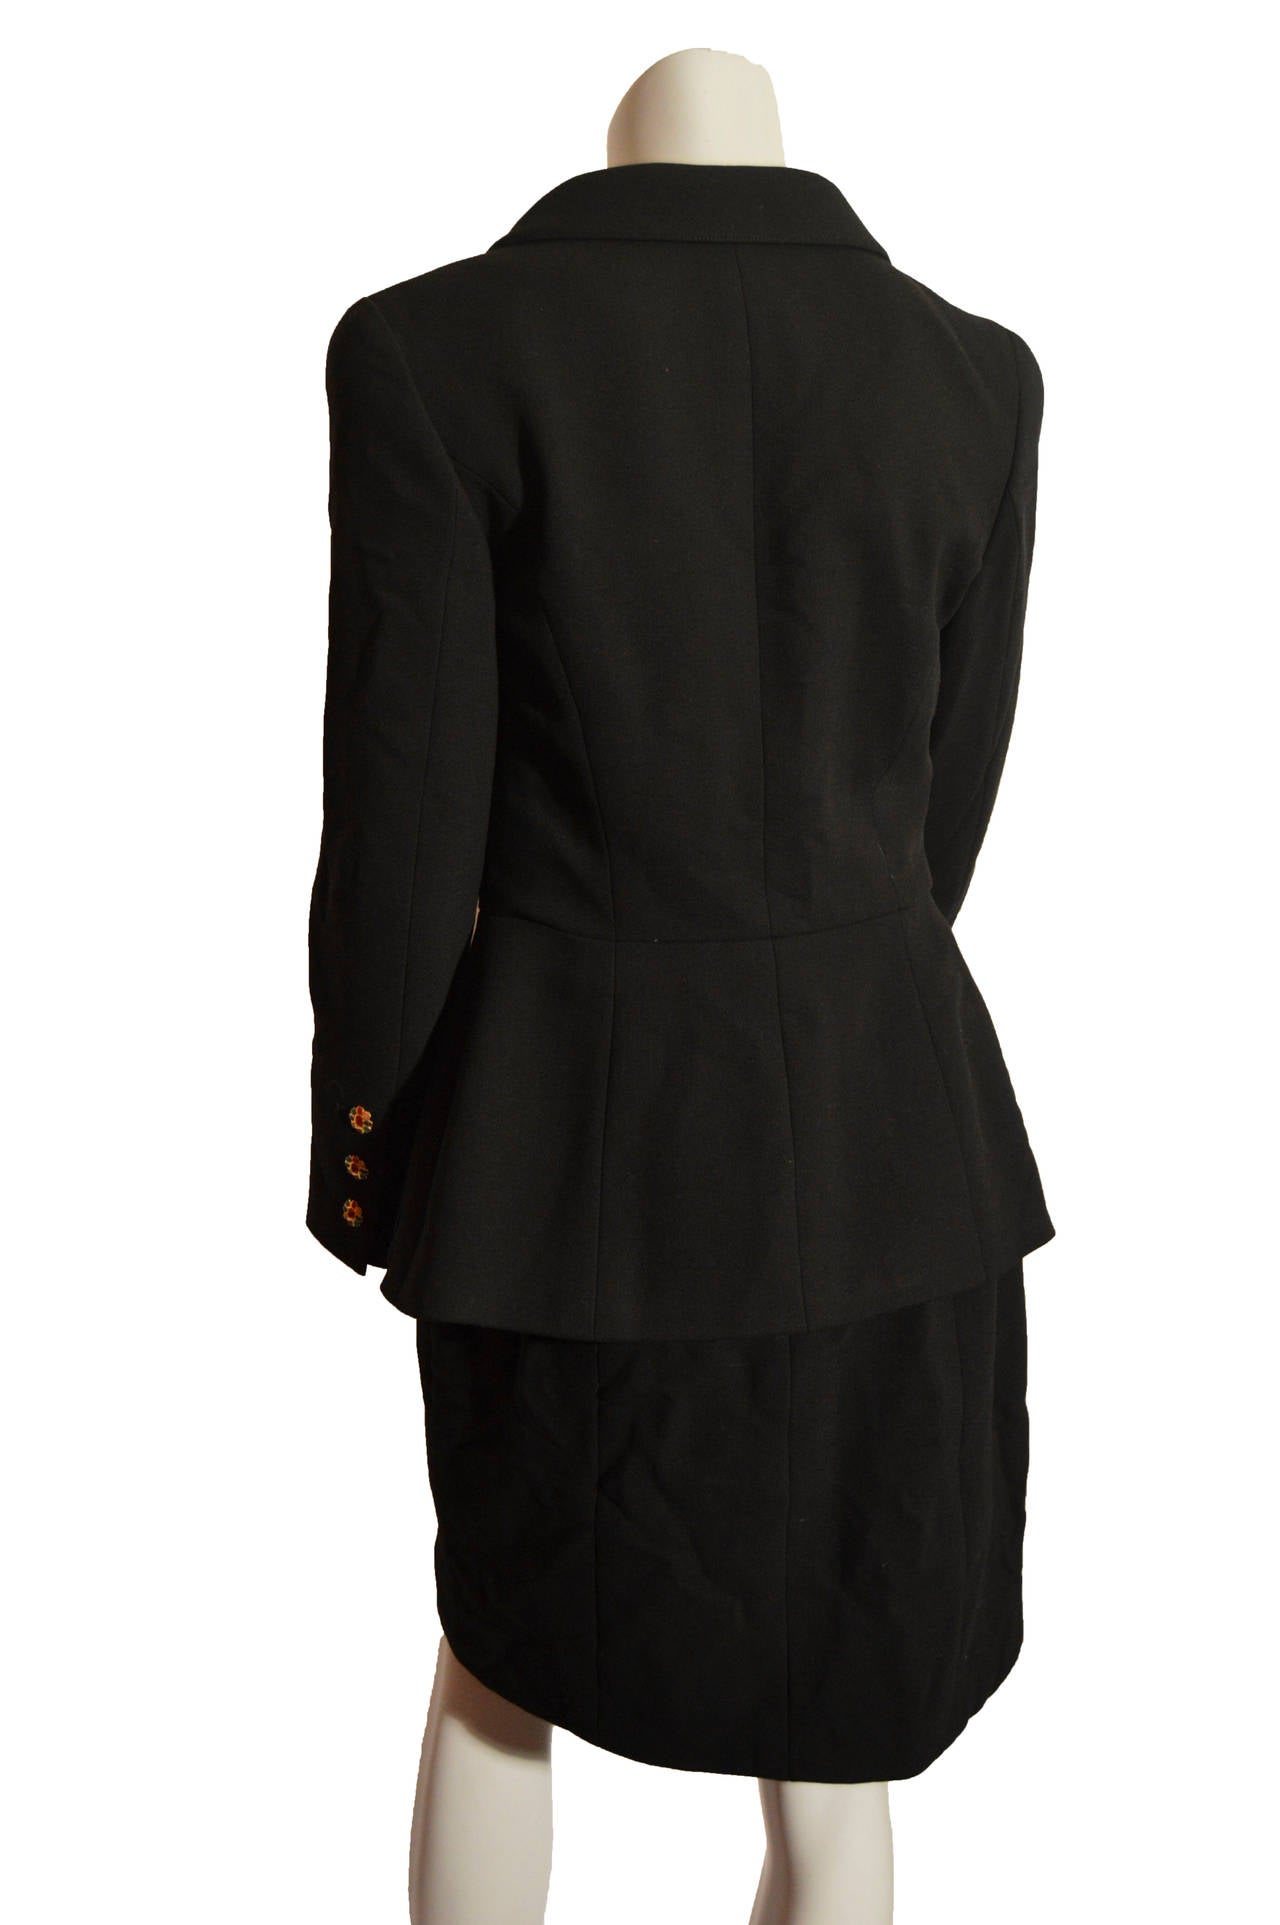 Chanel 1996 Black Wool Skirt Suit with Gripoix Buttons 2